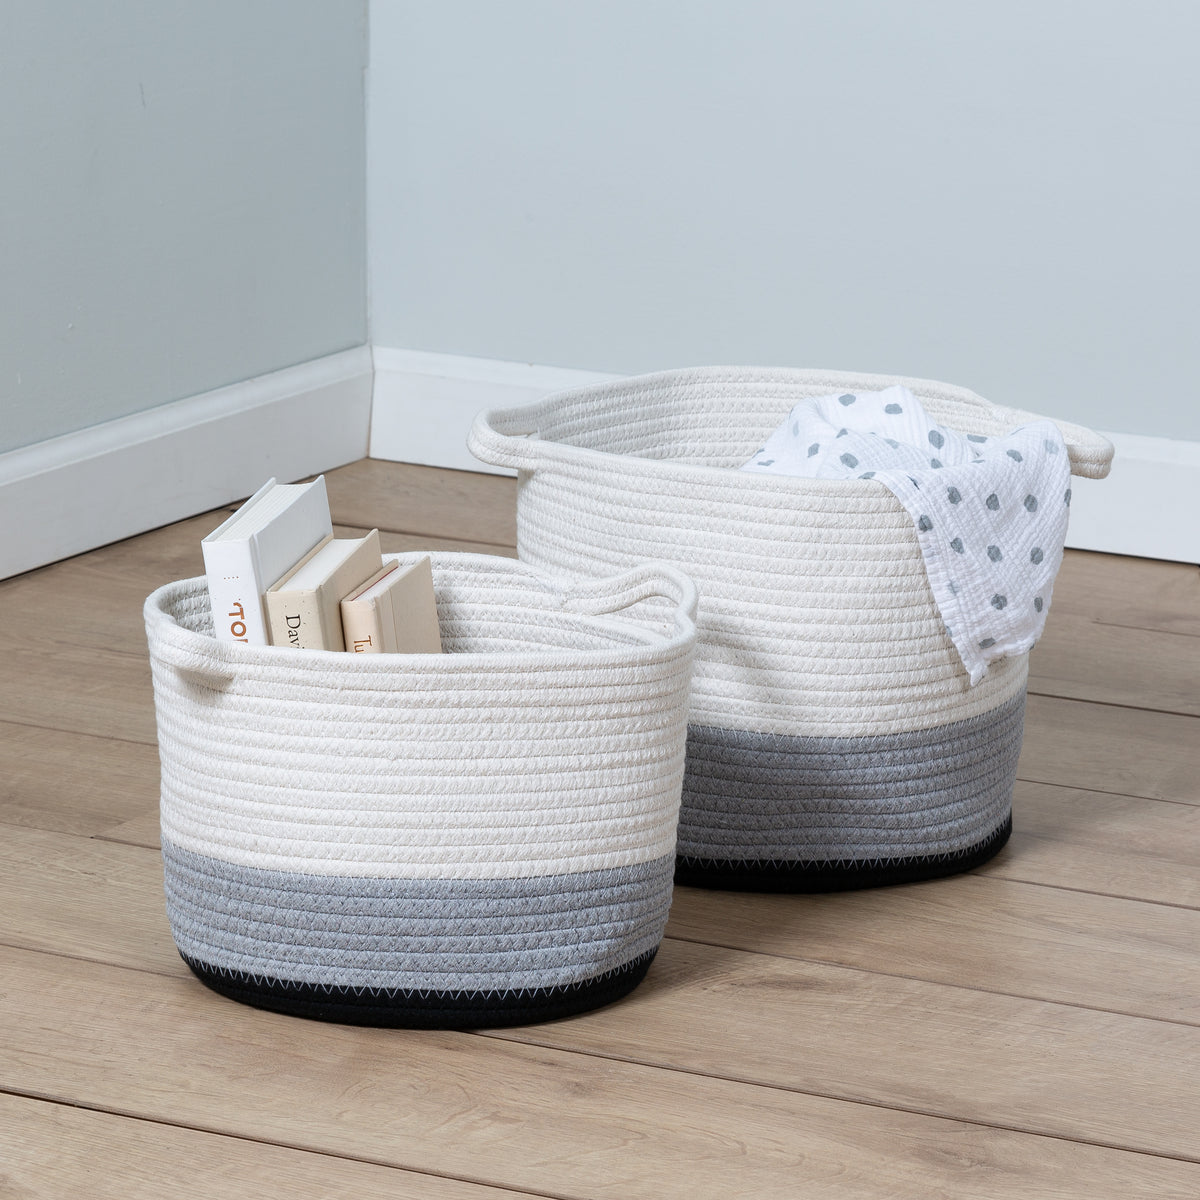 Honey-Can-Do Nesting Cotton Rope Storage Basket Set, Yellow Ombre